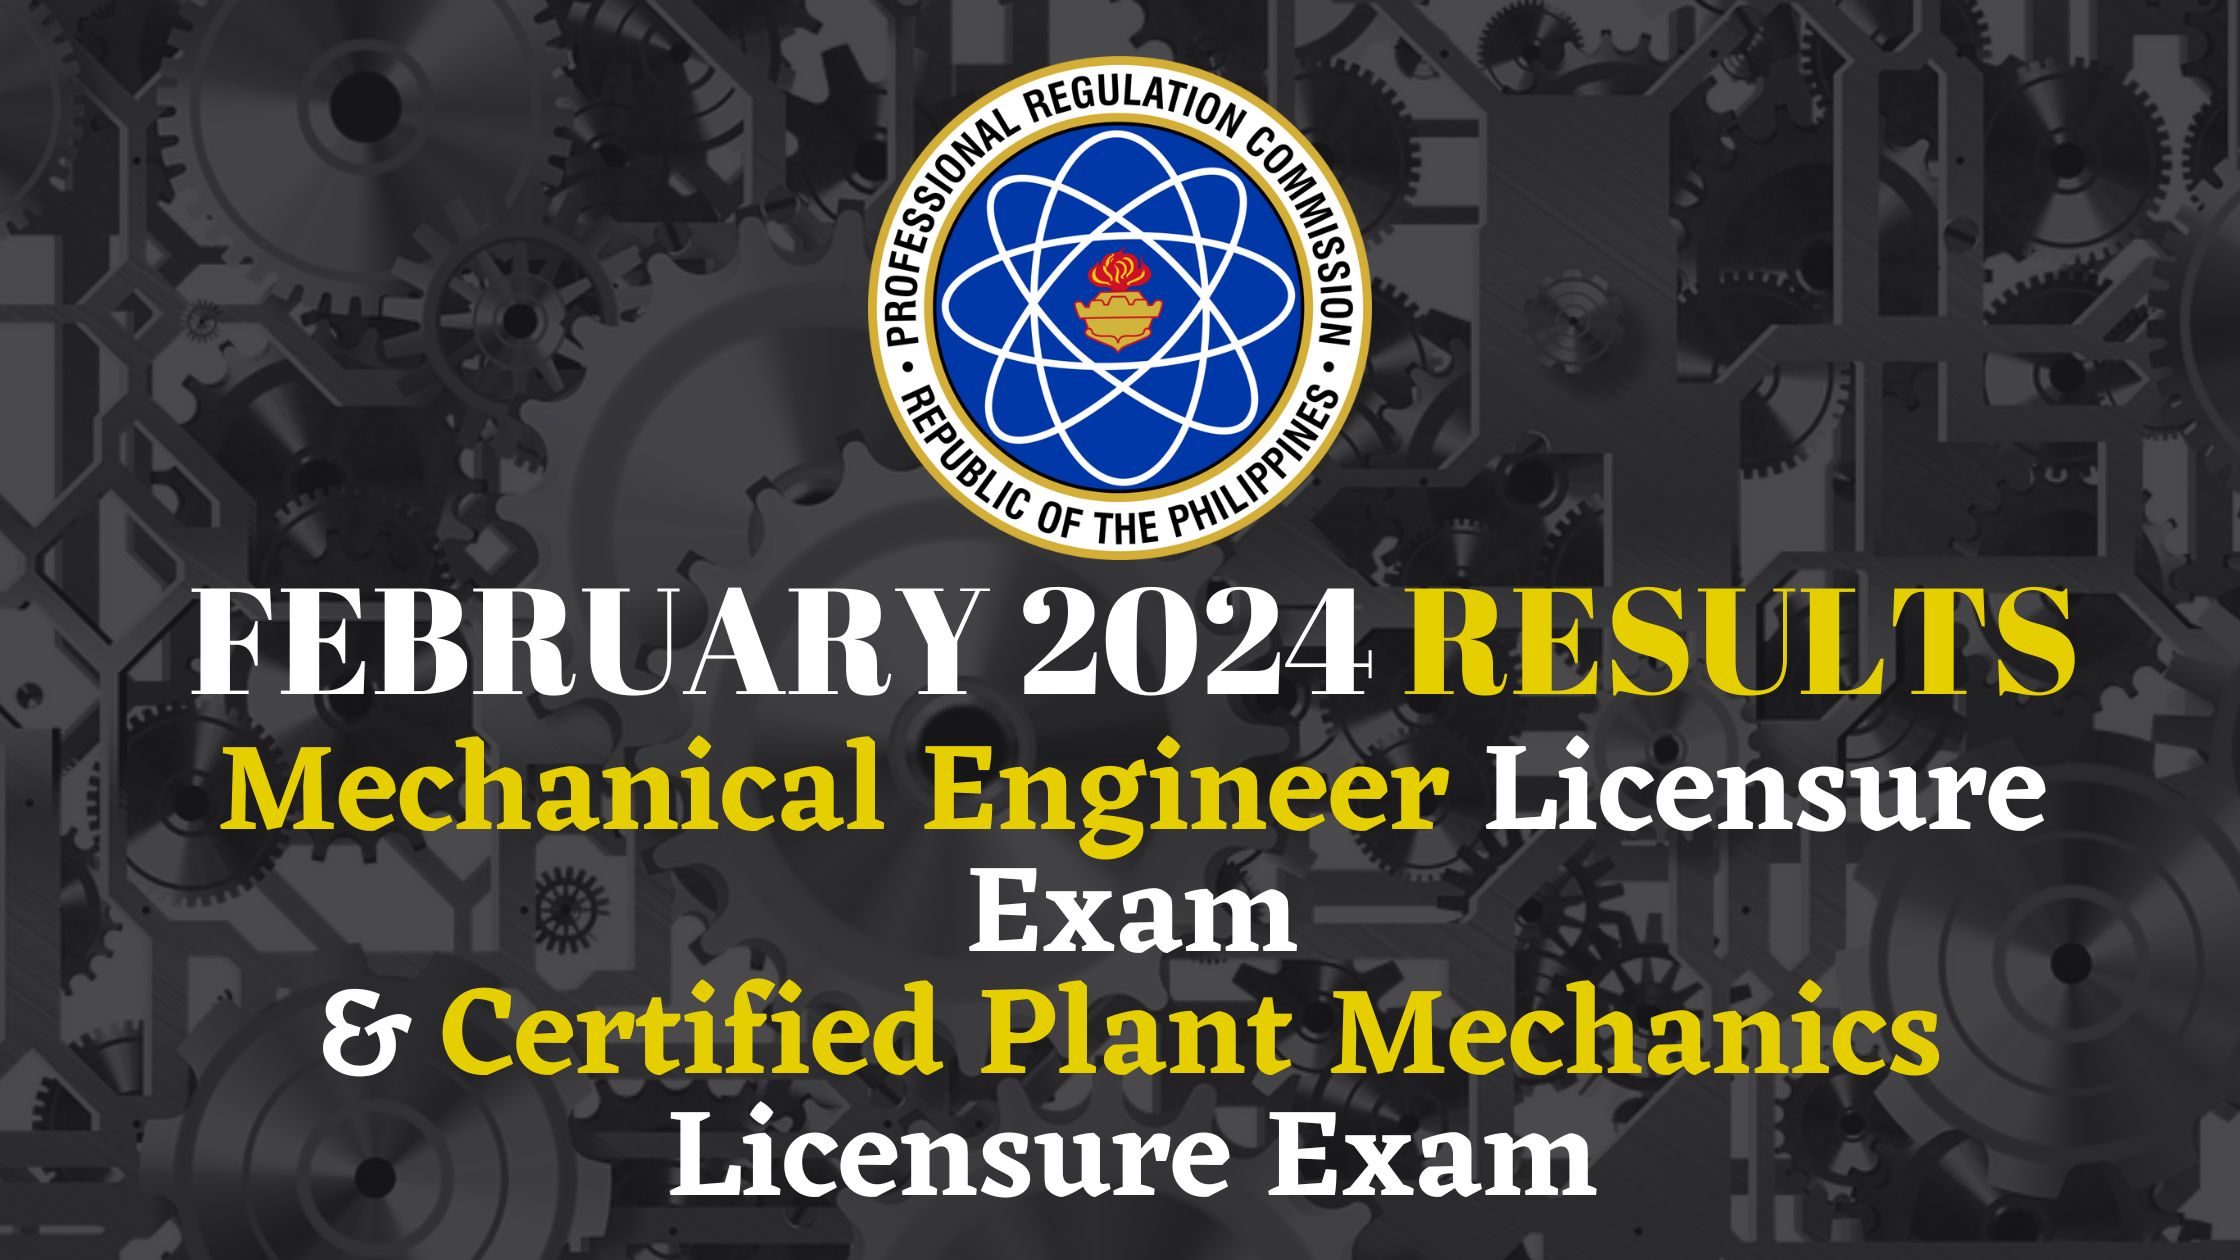 FEBRUARY 2024 RESULTS MECHANICAL ENGINEER LICENSURE EXAM (ME), TOP 10